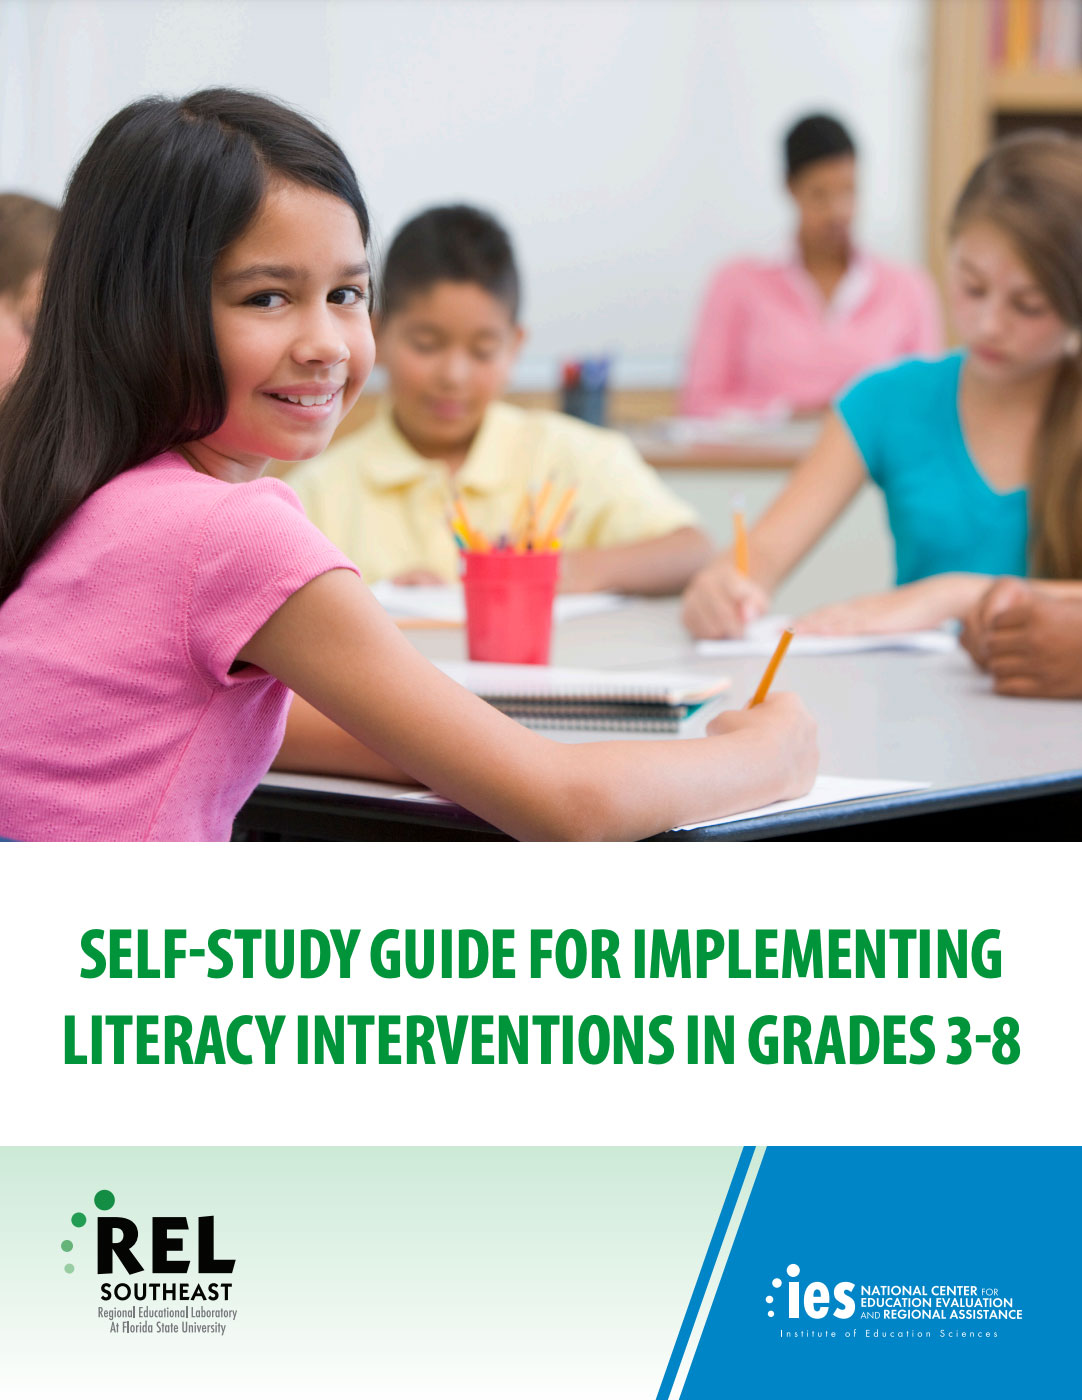 Self-Study Guide for Implementing Literacy Interventions in Grades 3-8